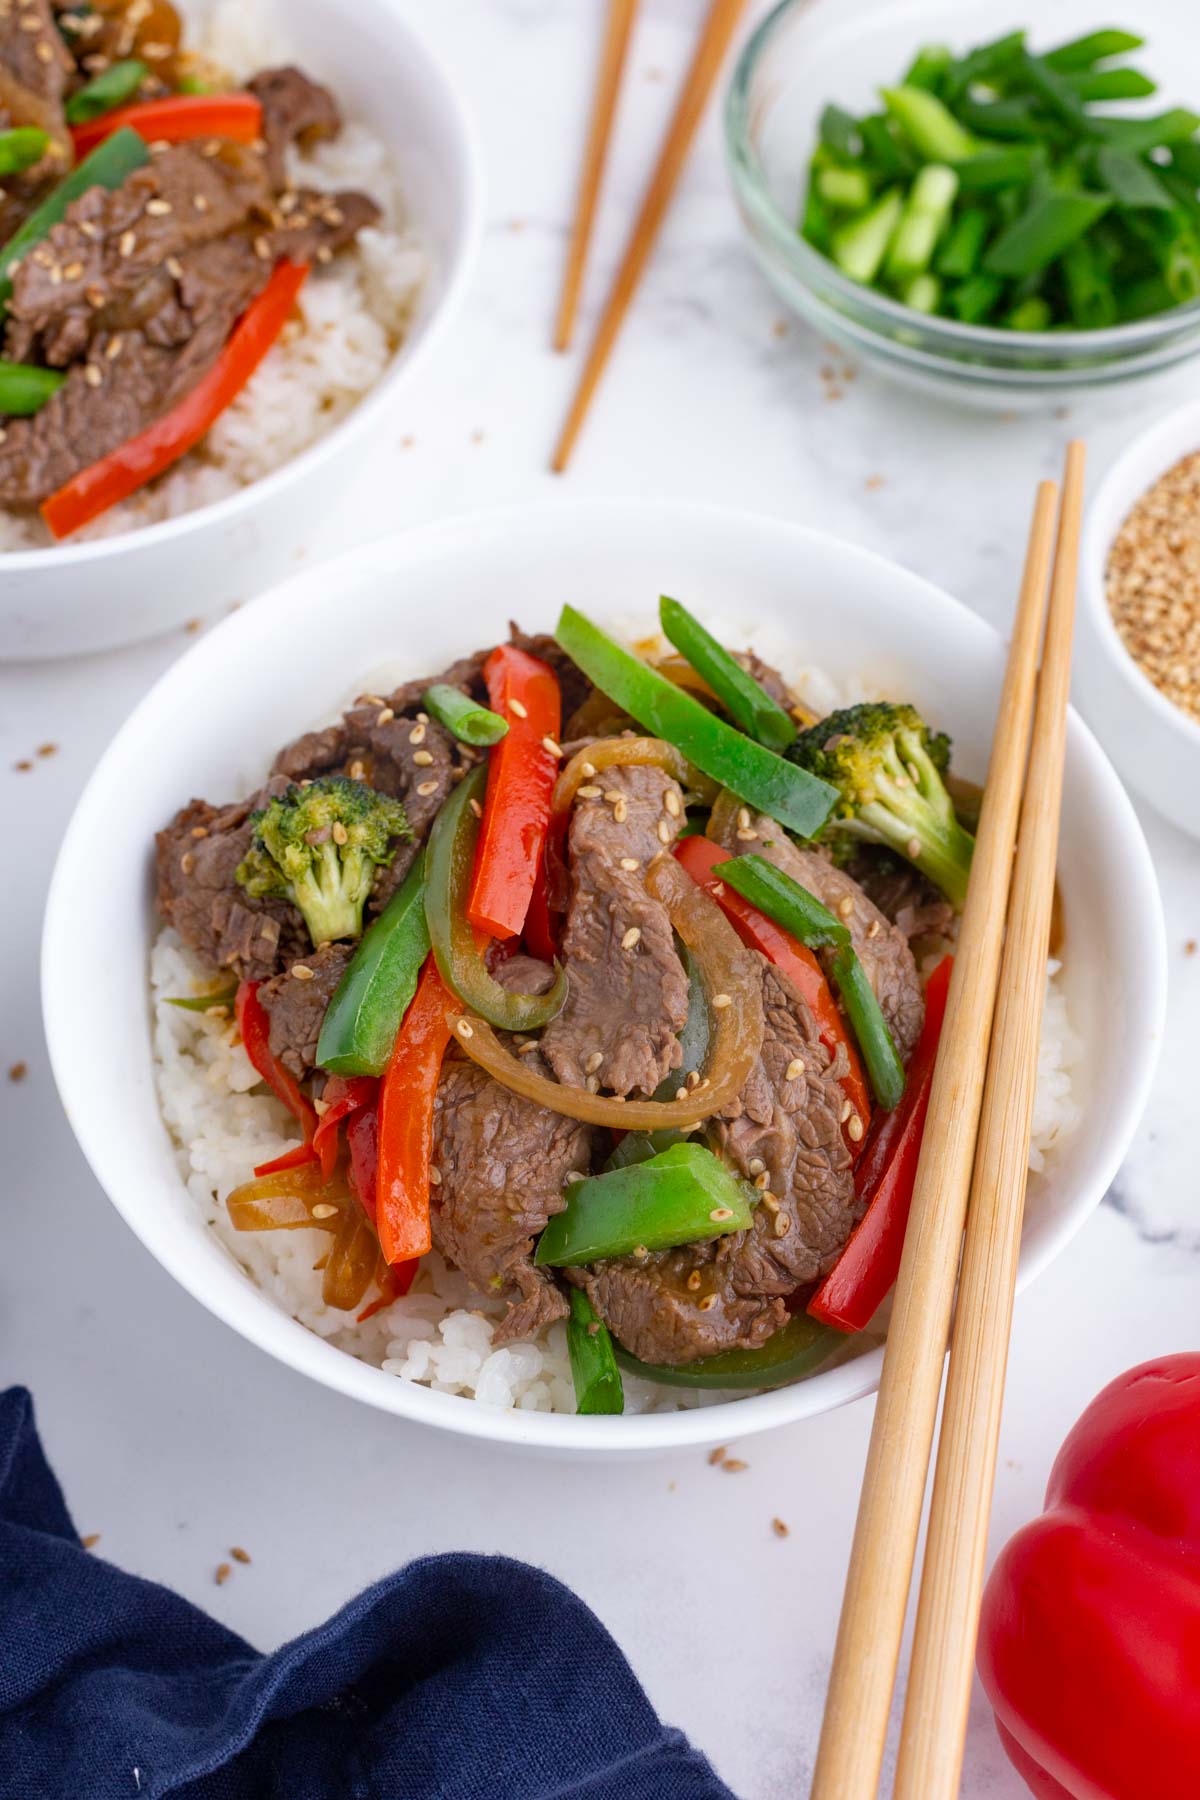 Serve beef stir fry over your favorite rice.